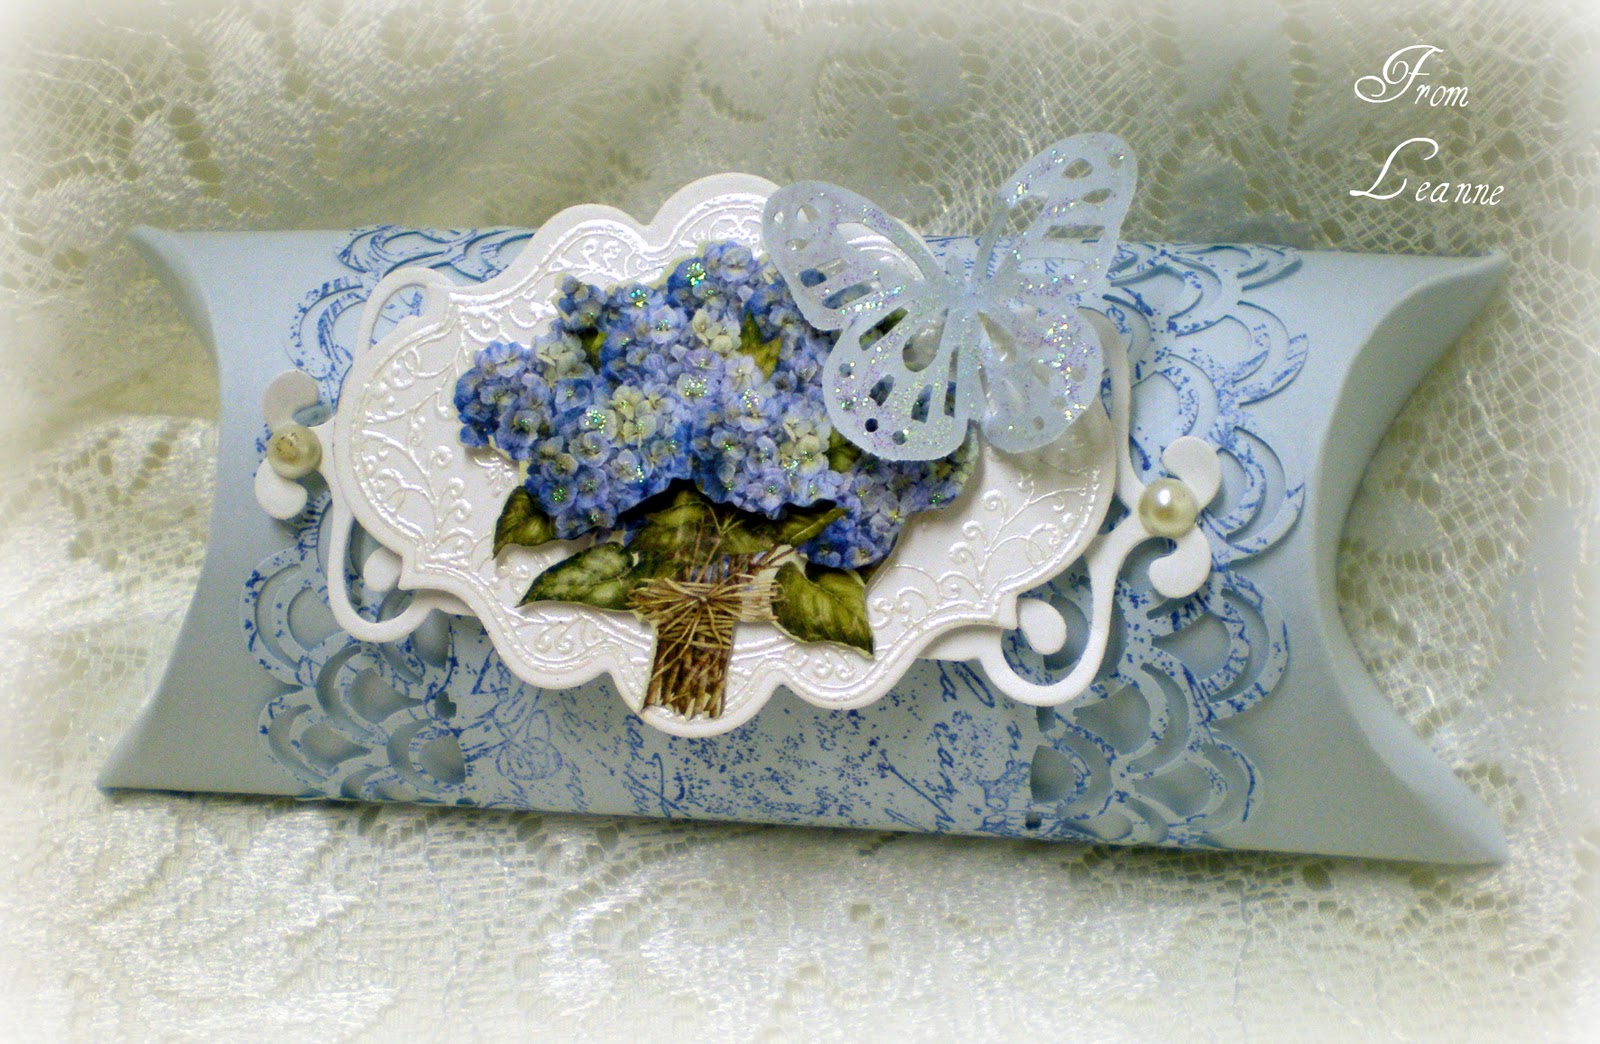 ideas and box's ideas pillow picture's  paper these box  crafting have your hope inspired